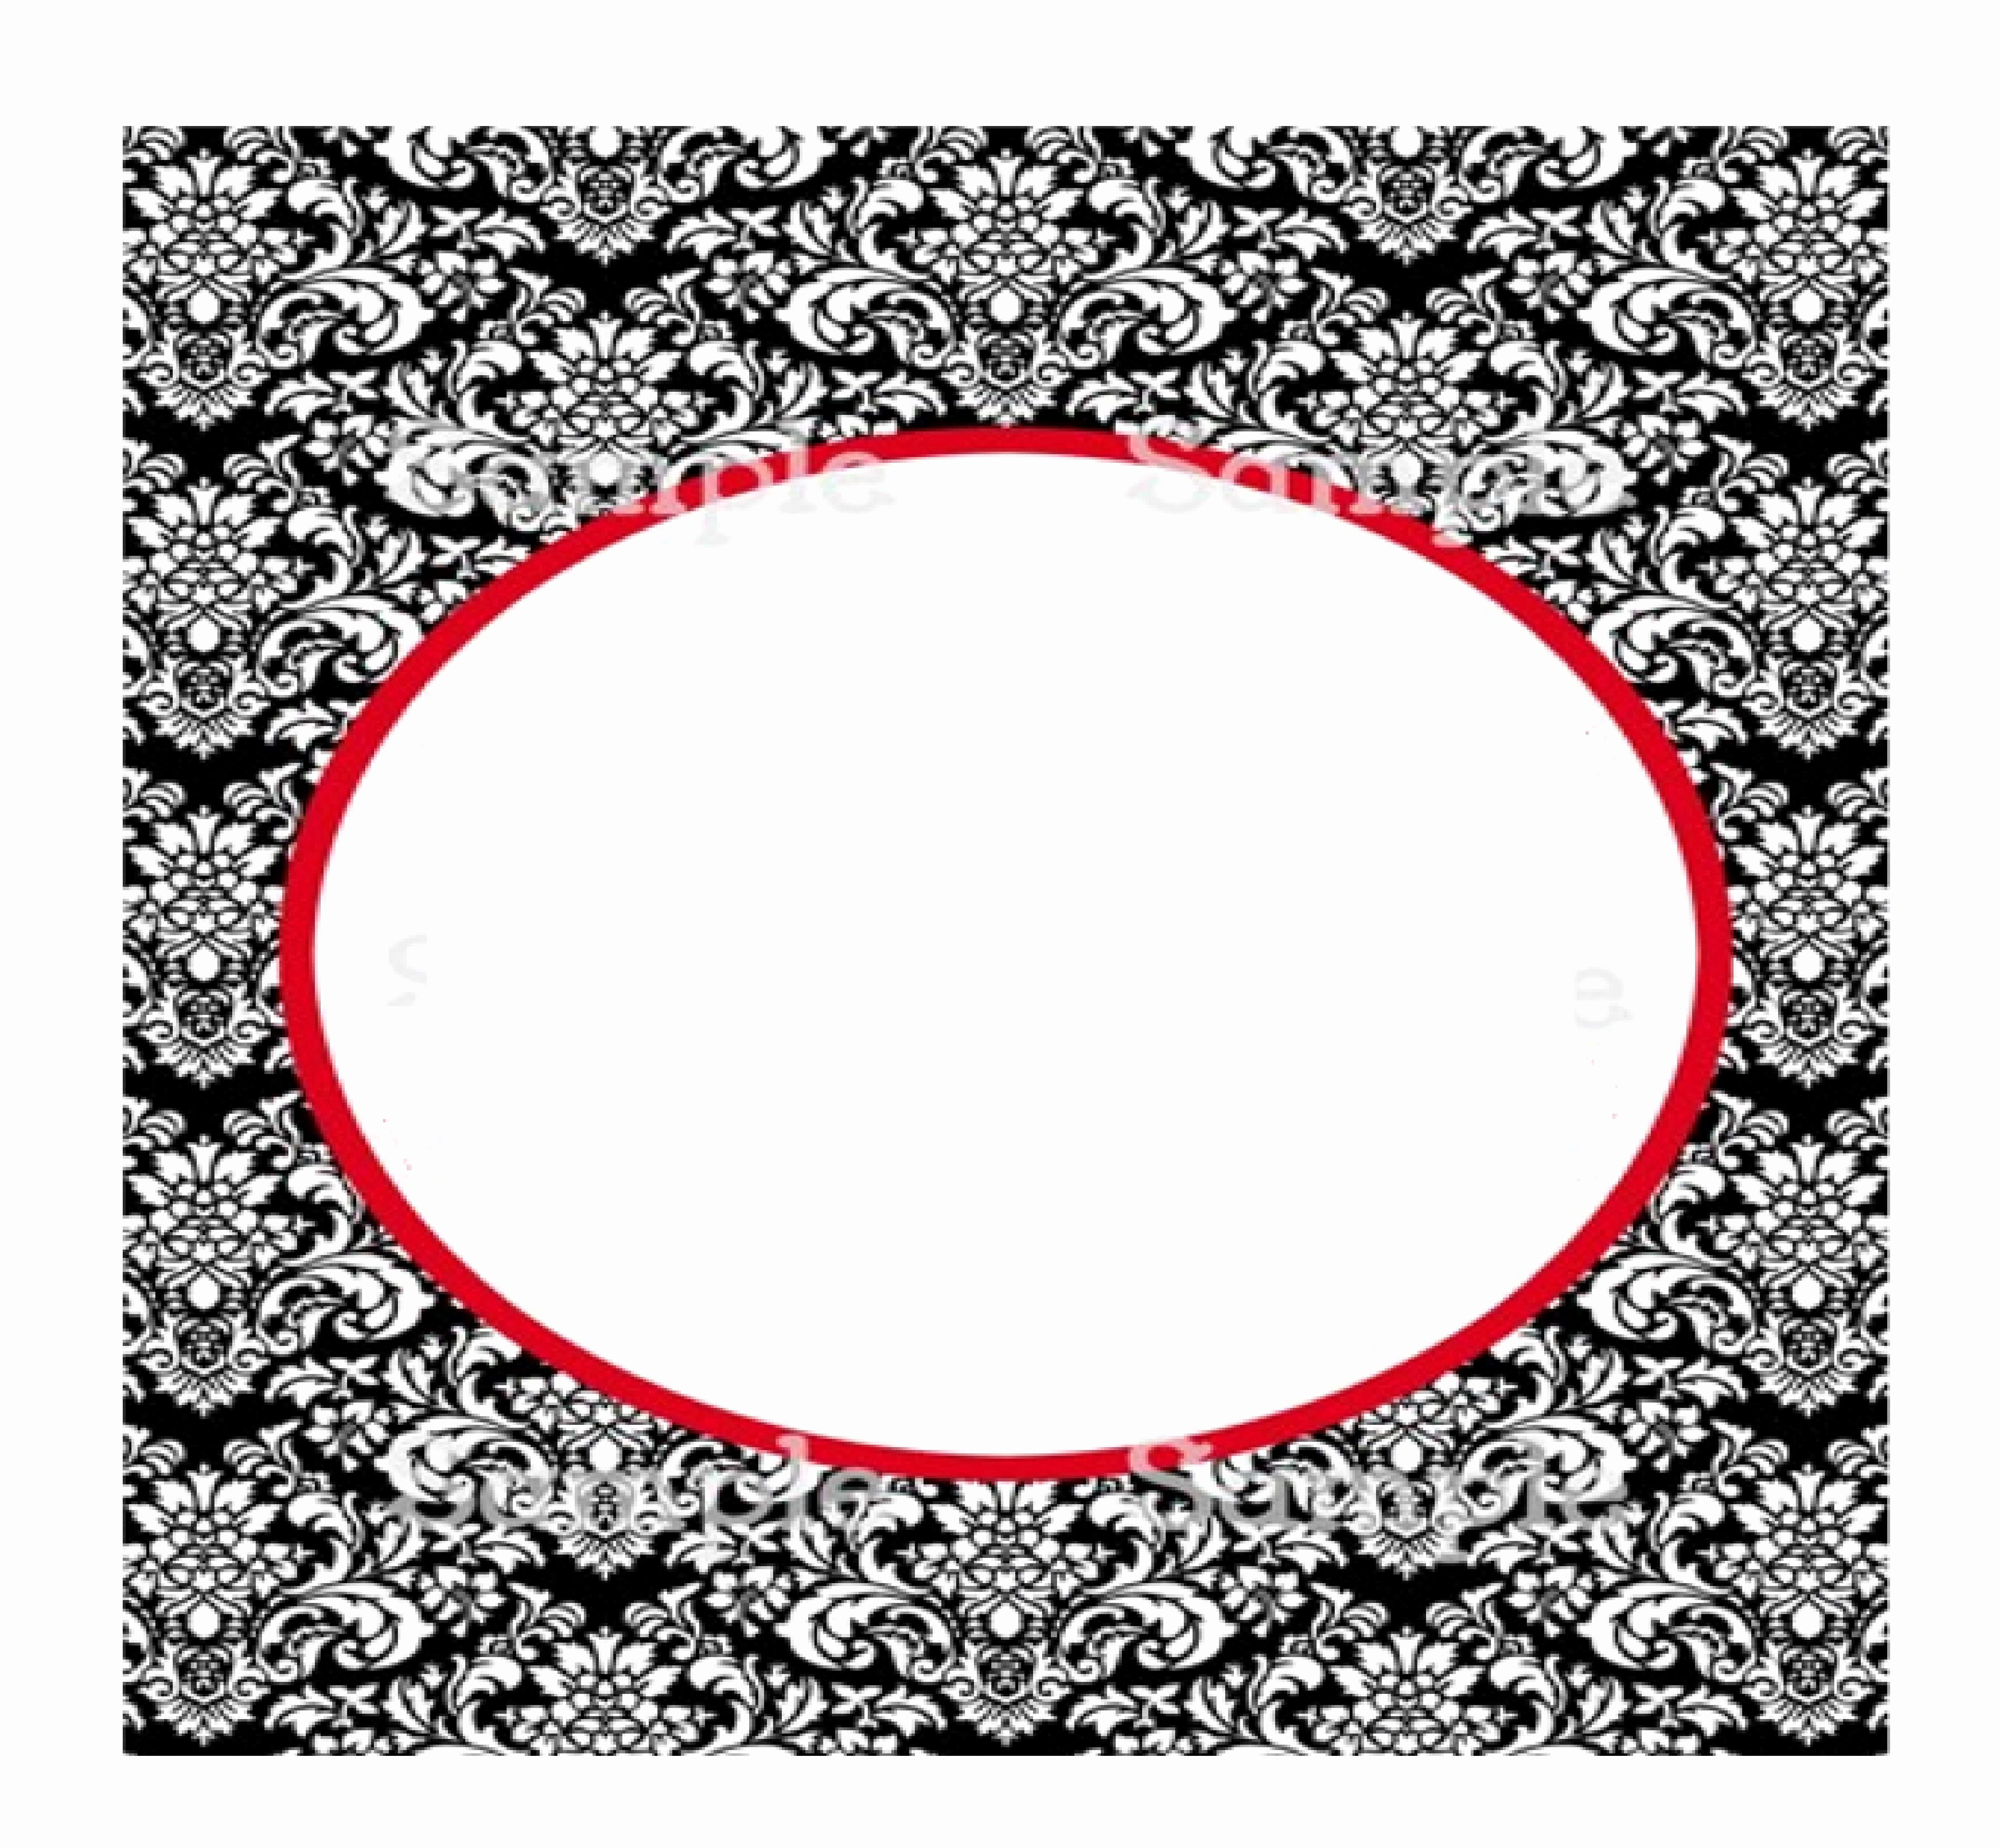 binder cover templates